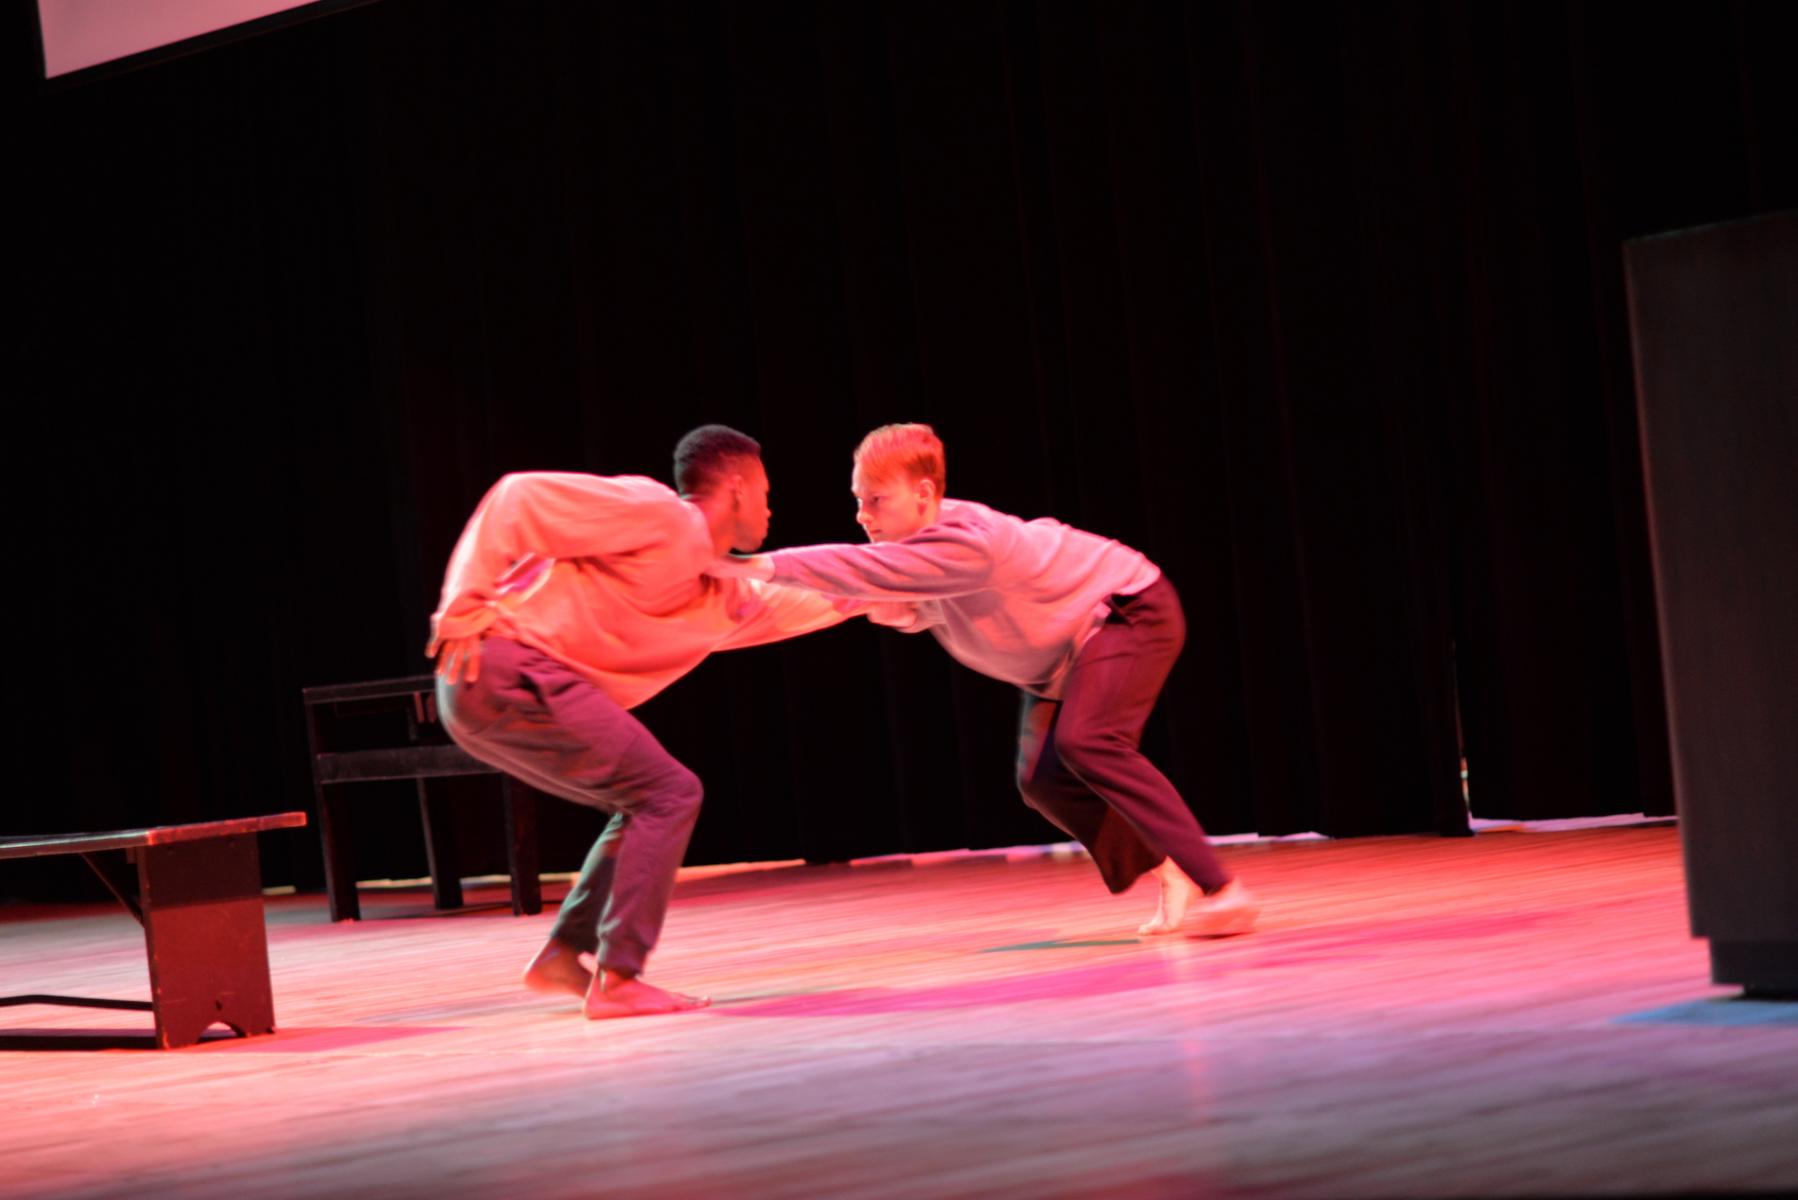 Dance performance image, Two men locked arms facing each other